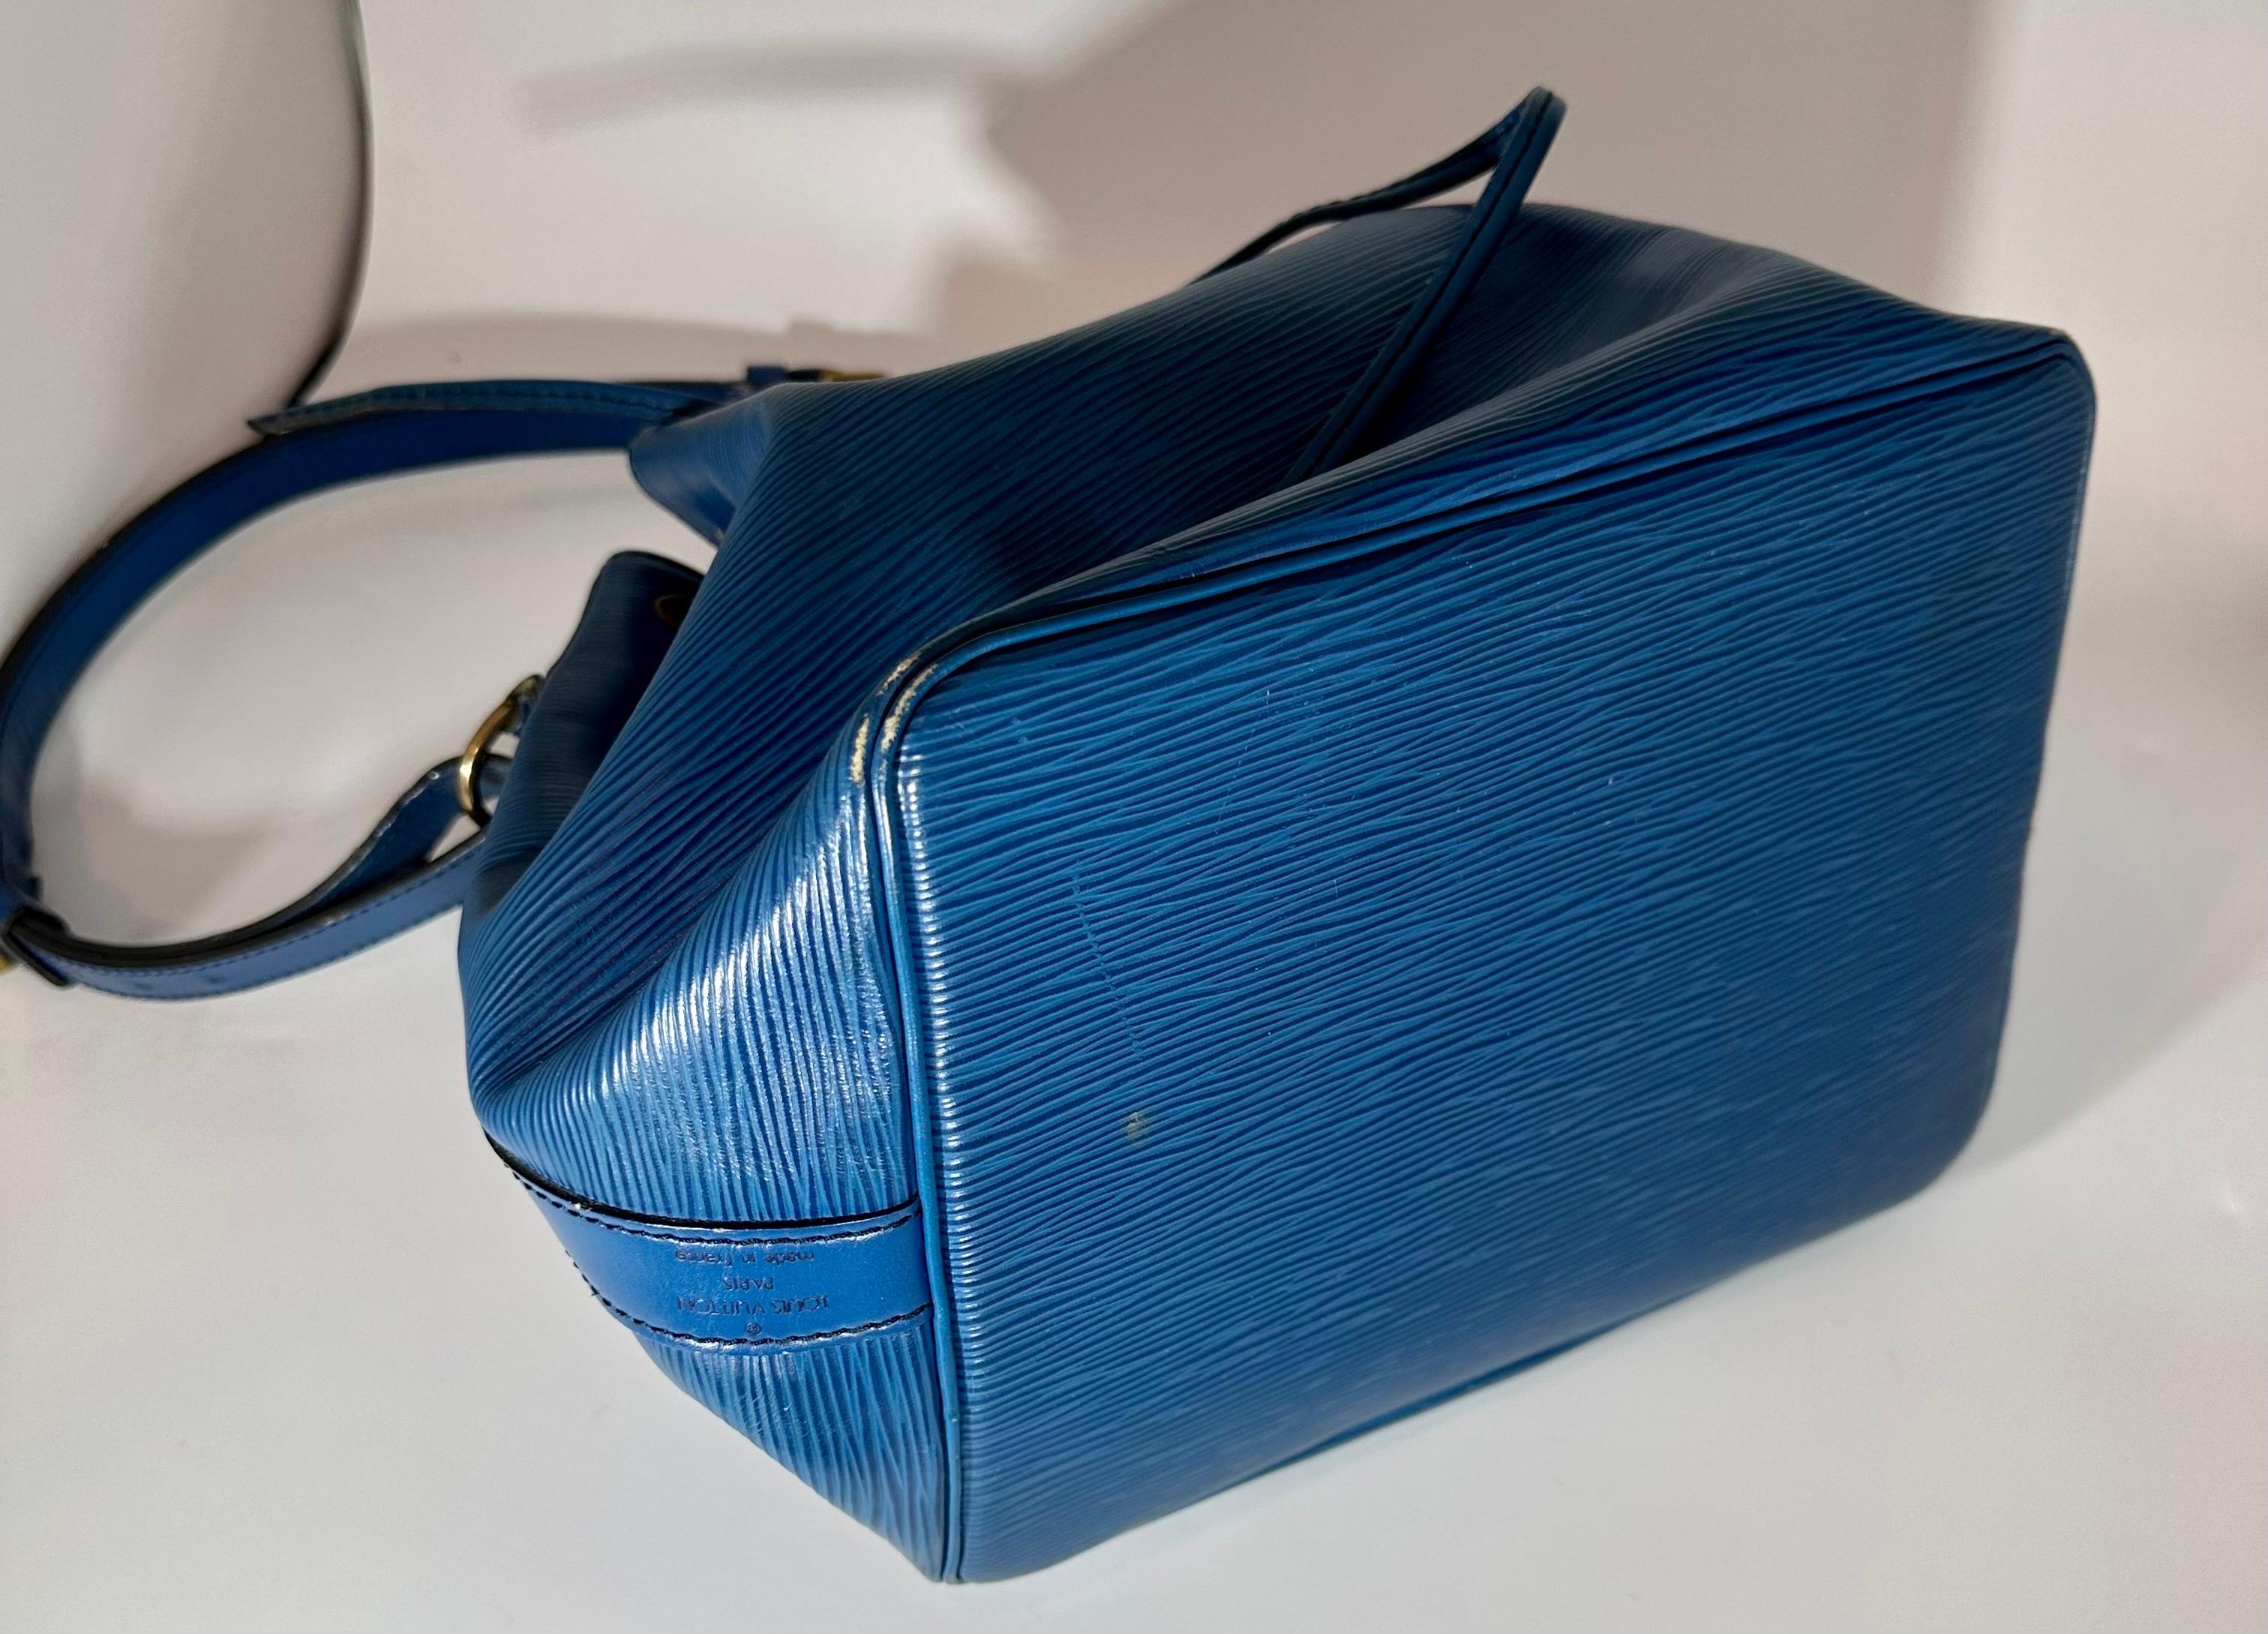   LOUIS VUITTON BLUE EPI NOÉ PETITE Drawstring Hand Bag/ Shoulder Bag In Good Condition For Sale In New York, NY